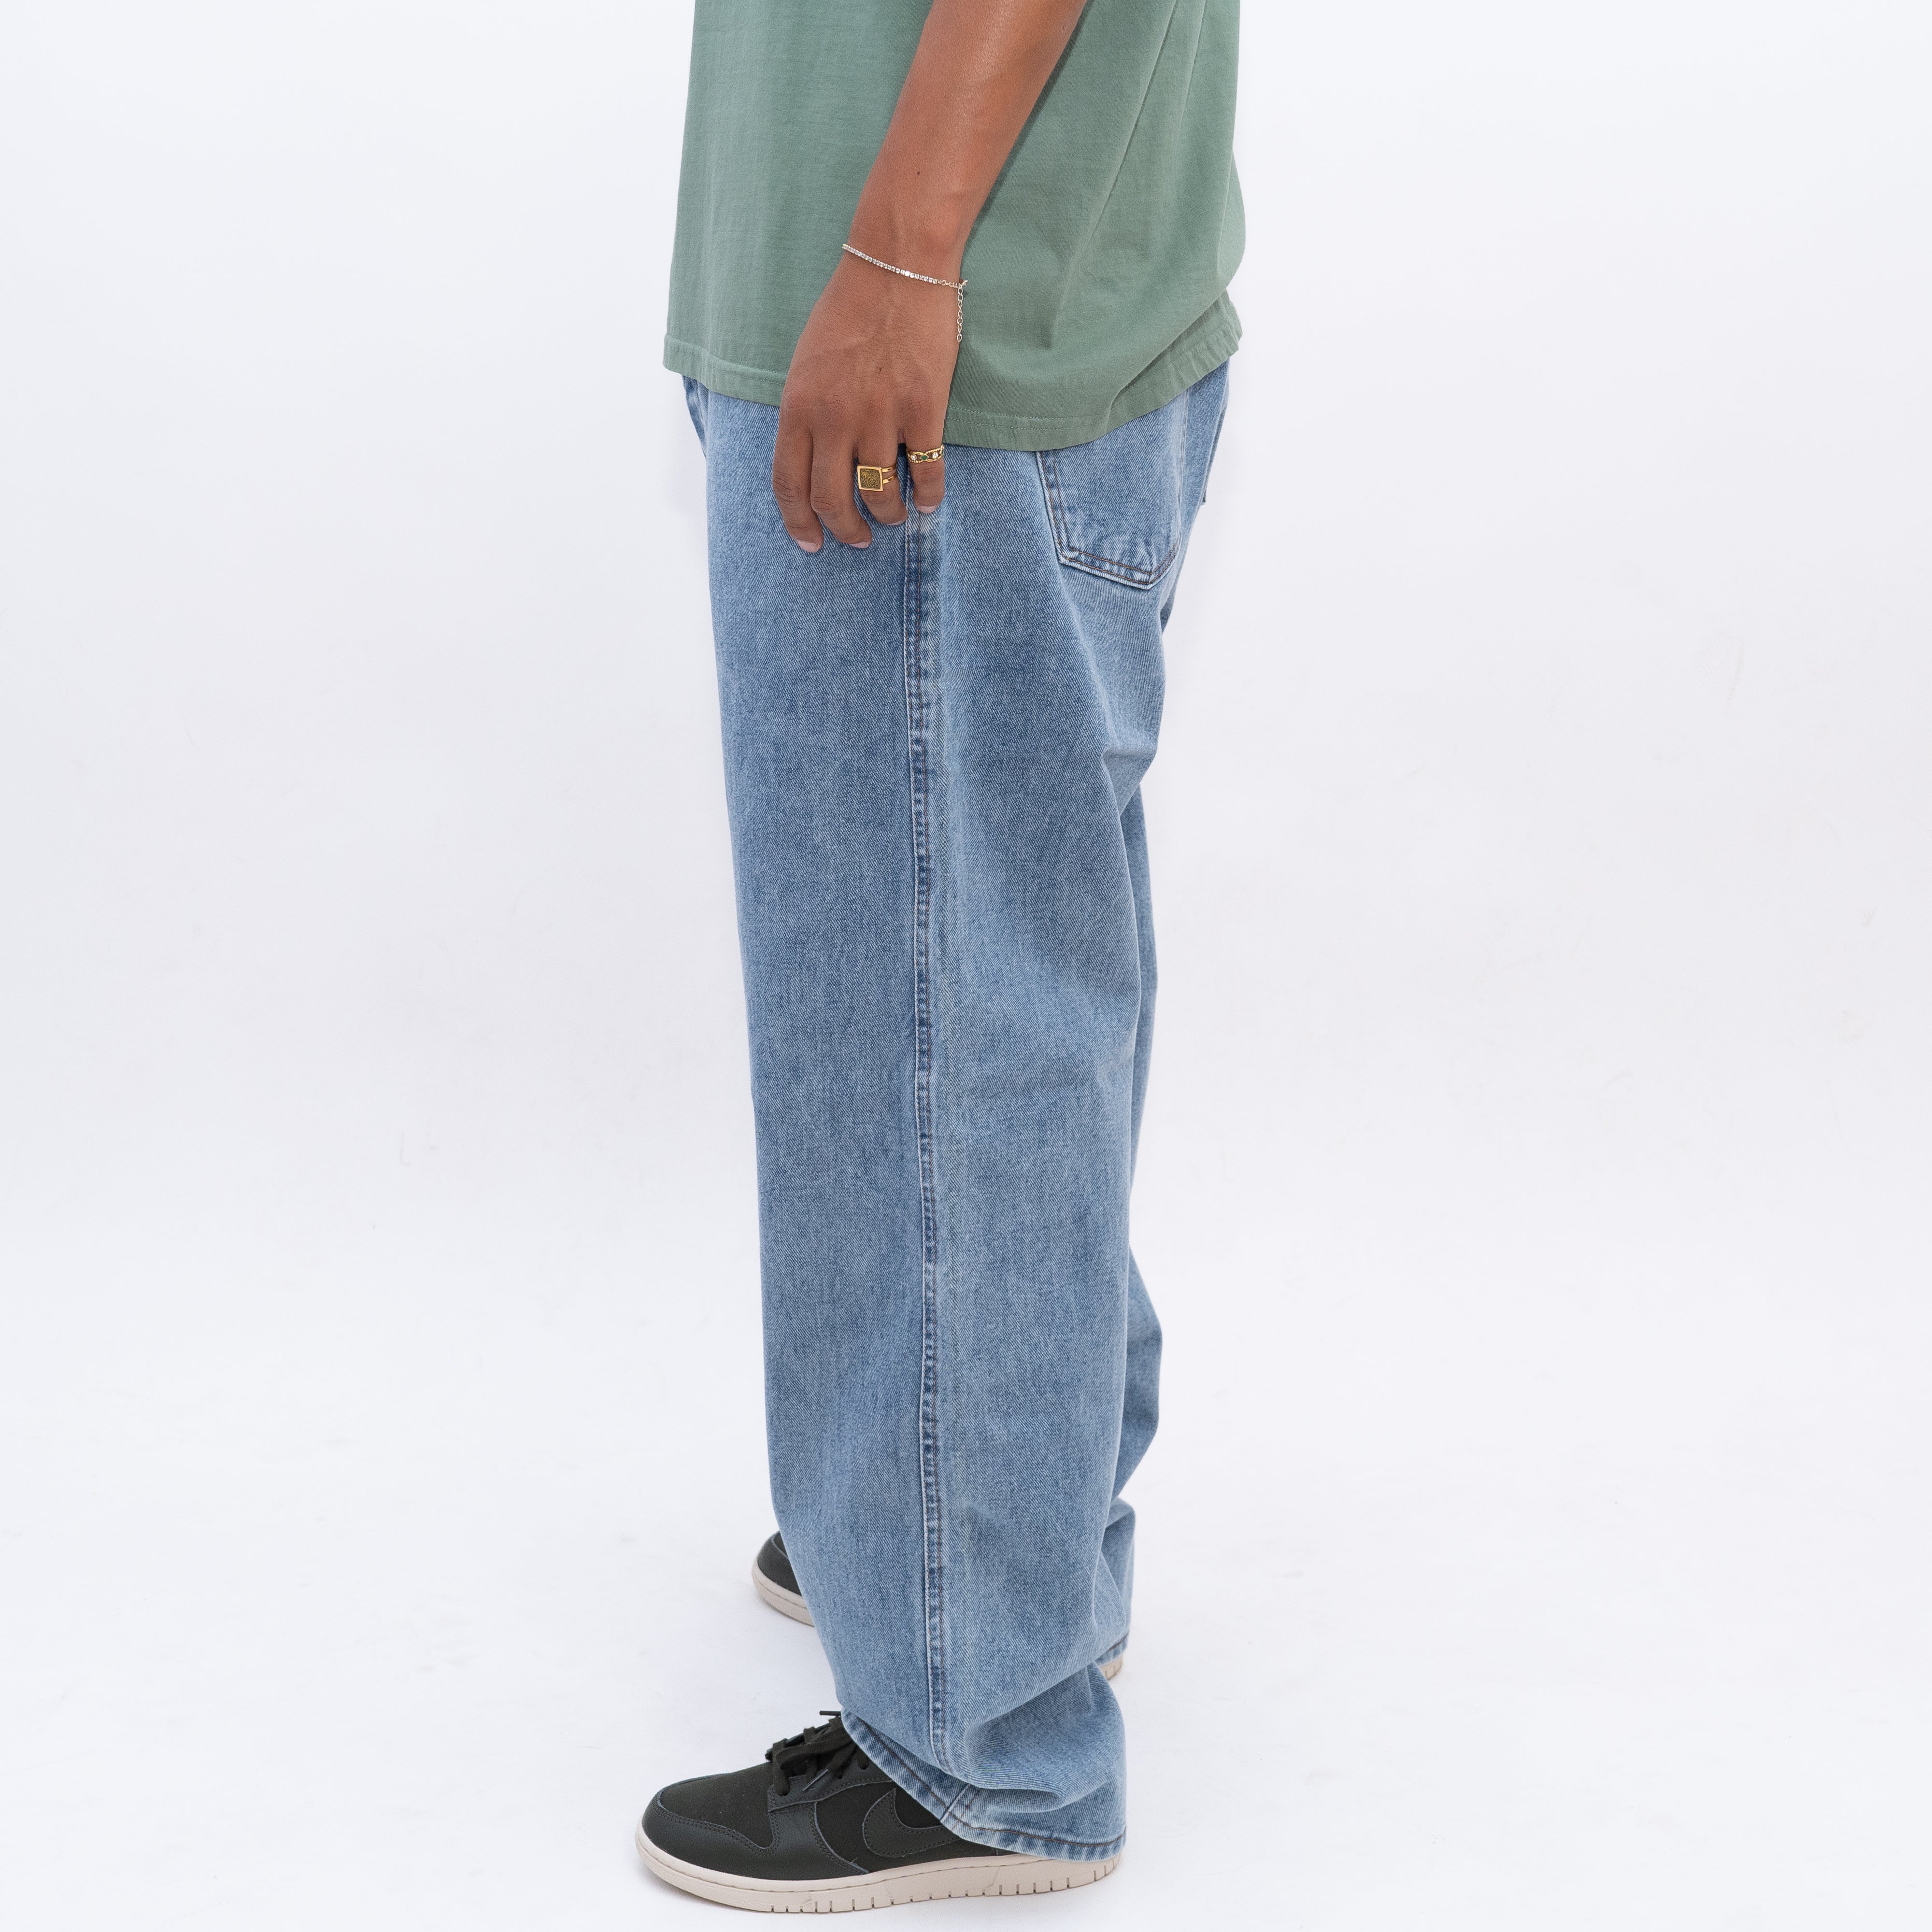 Baby Jeans Relaxed Fit Pants Blue Washed